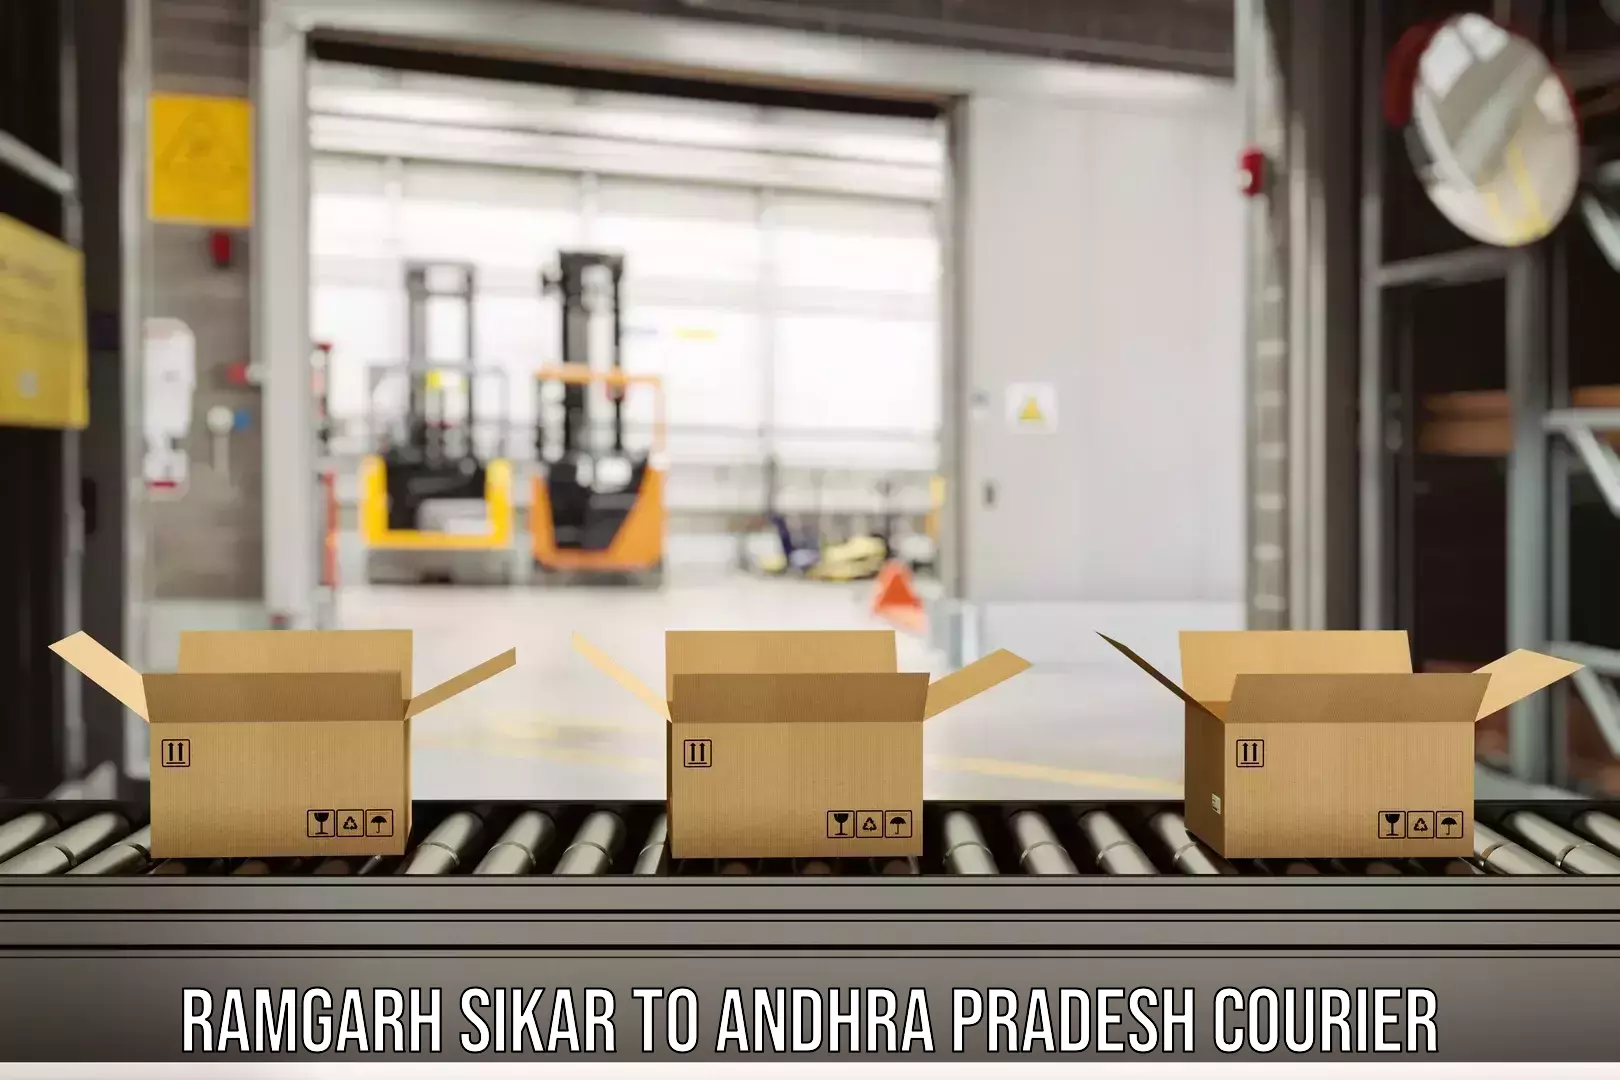 High-quality delivery services Ramgarh Sikar to Andhra Pradesh